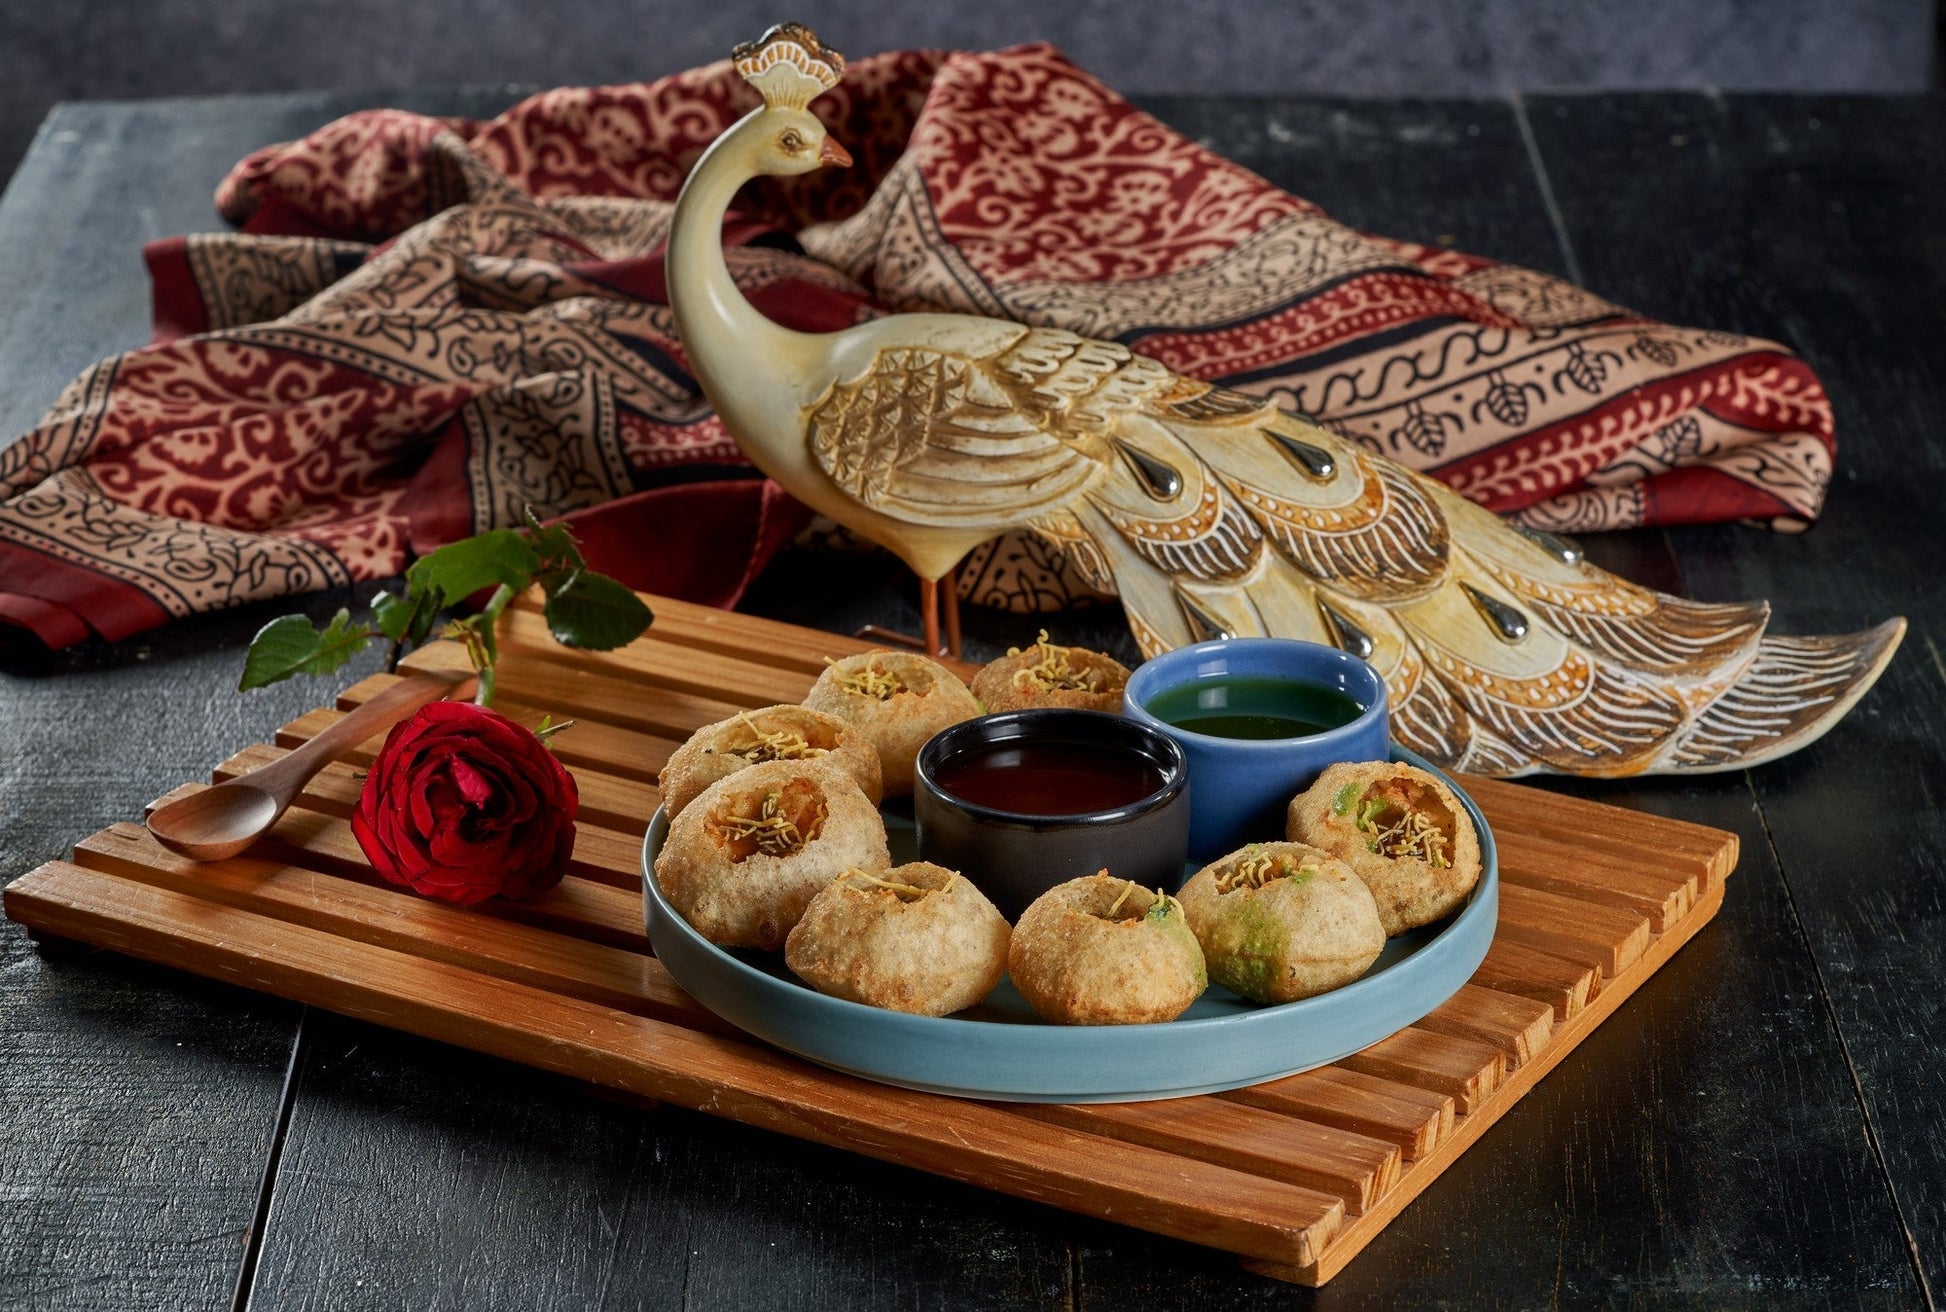 A plate of Pani Puri, a crispy and savory Indian snack filled with a tangy and spicy water